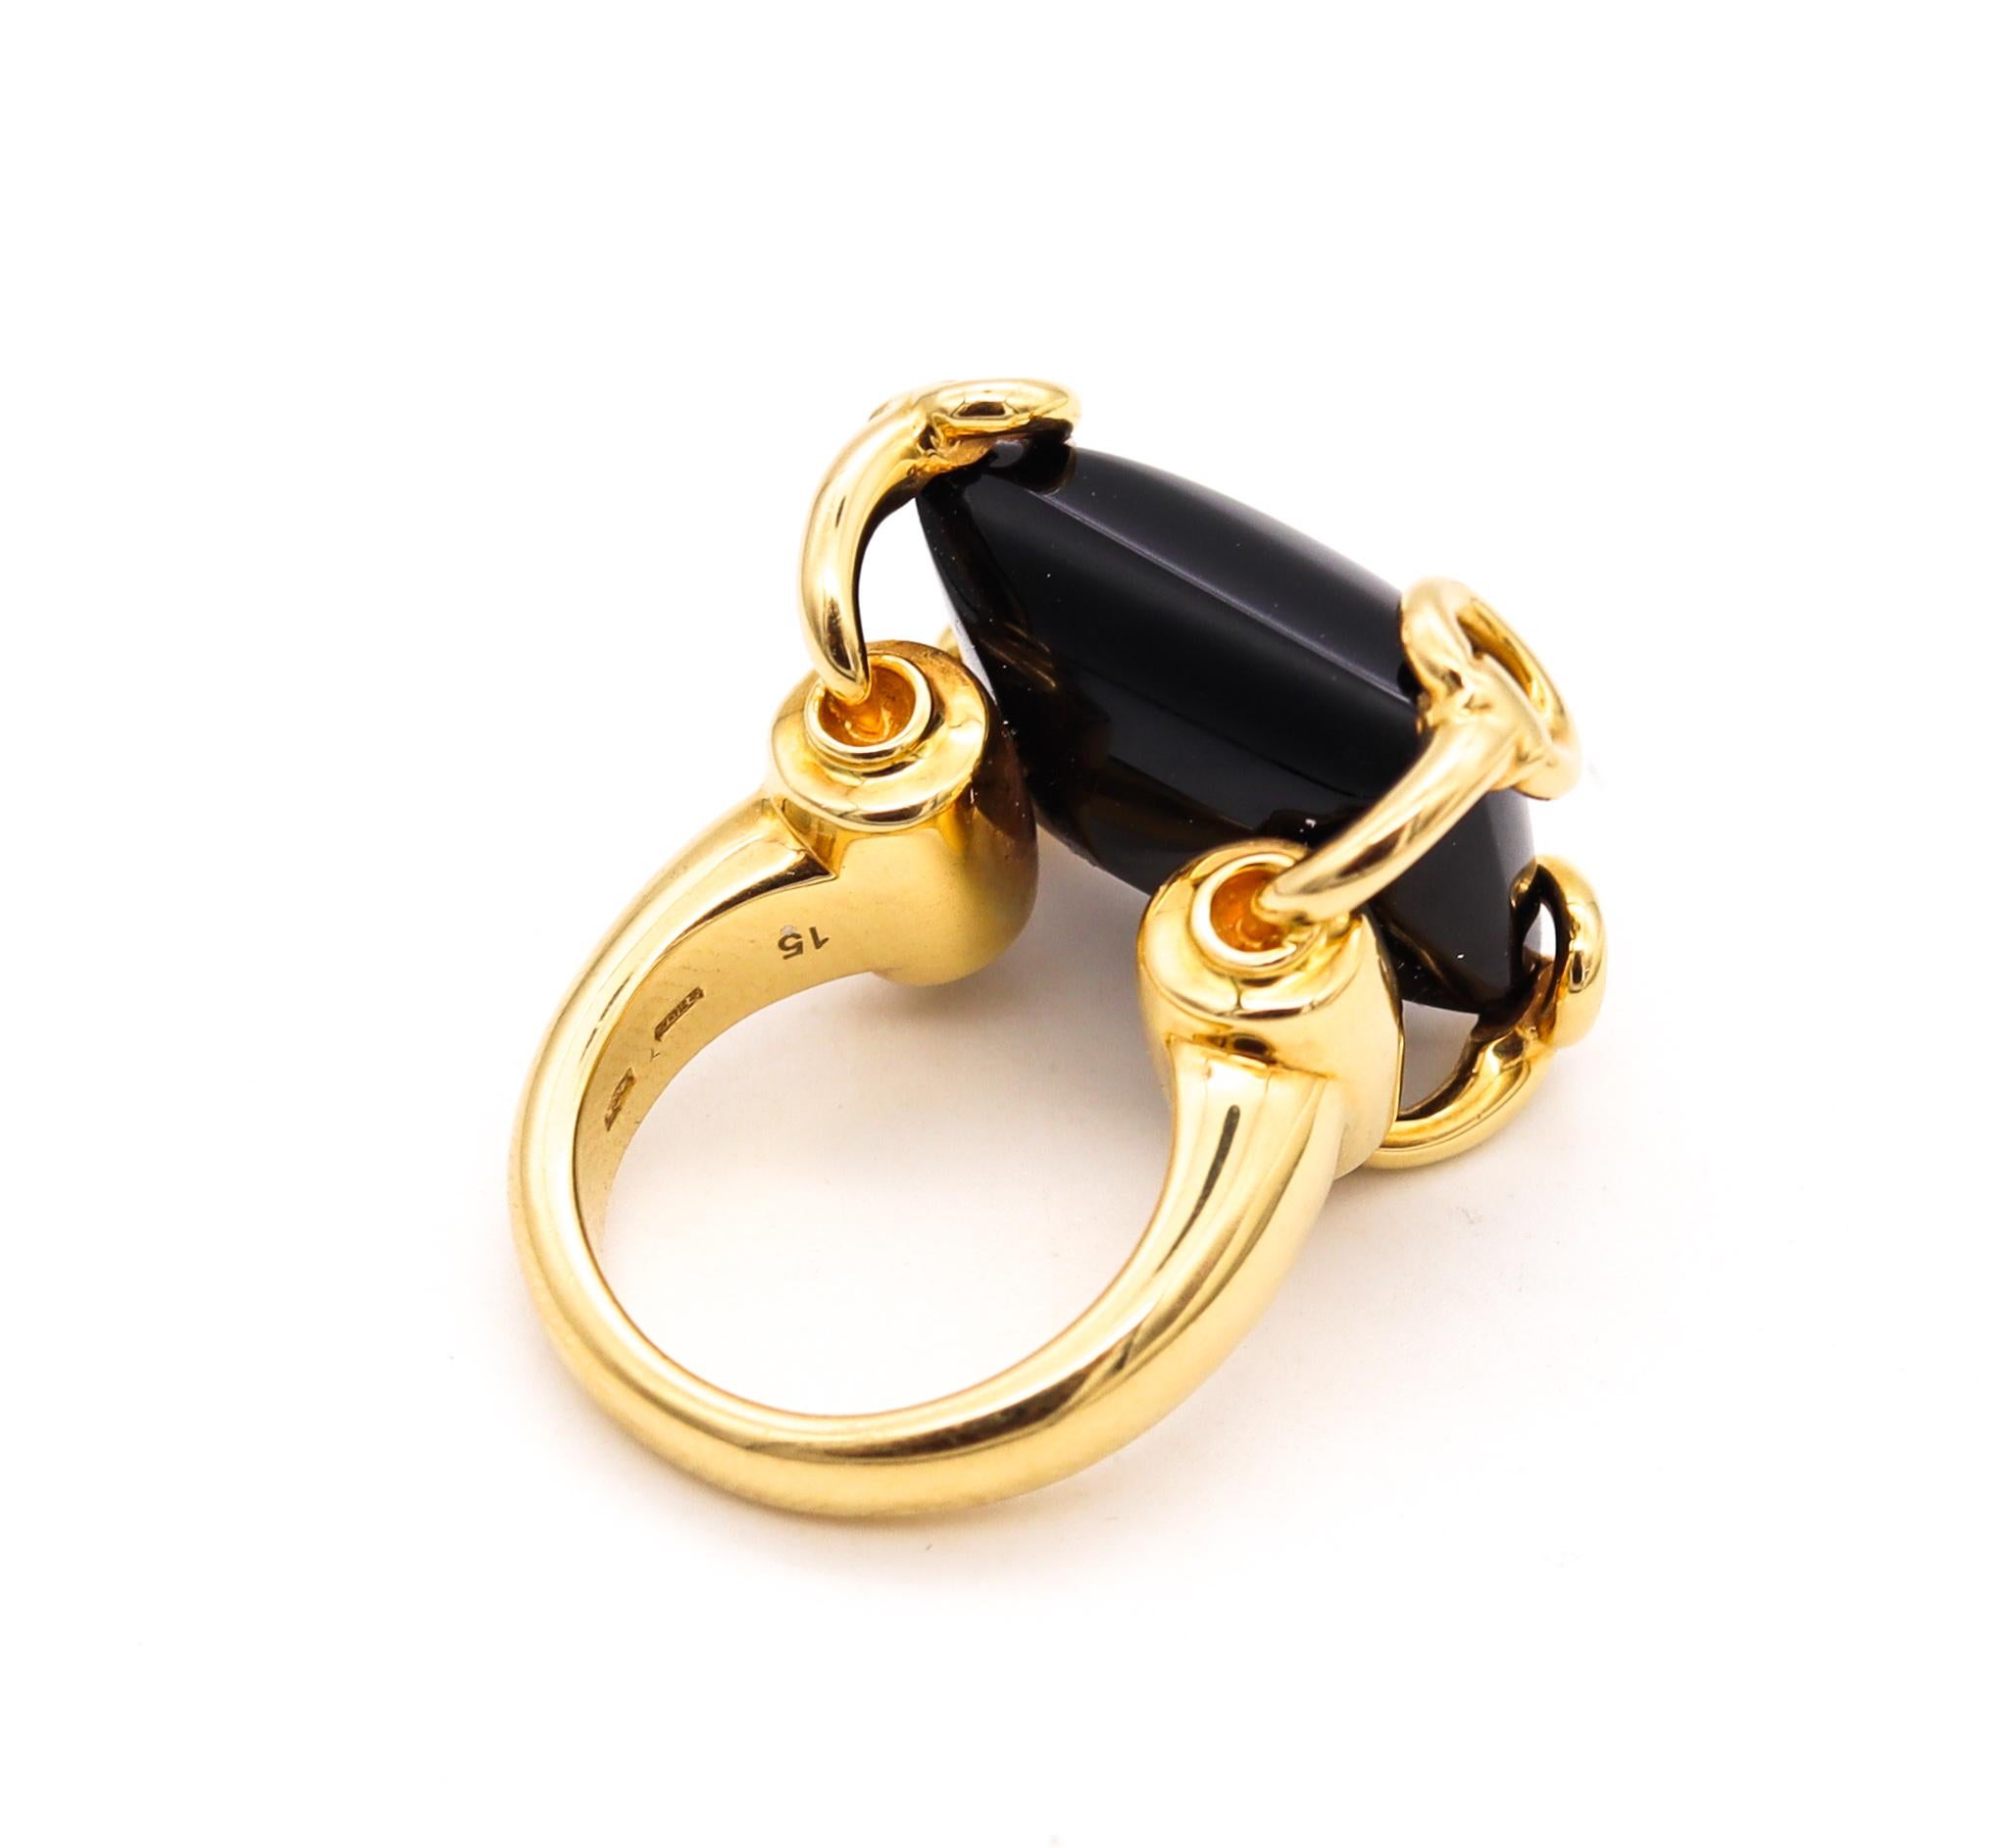 Cabochon Gucci Milano Horsebit Cocktail Ring in 18Kt Yellow Gold with 26 Cts Black Onyx